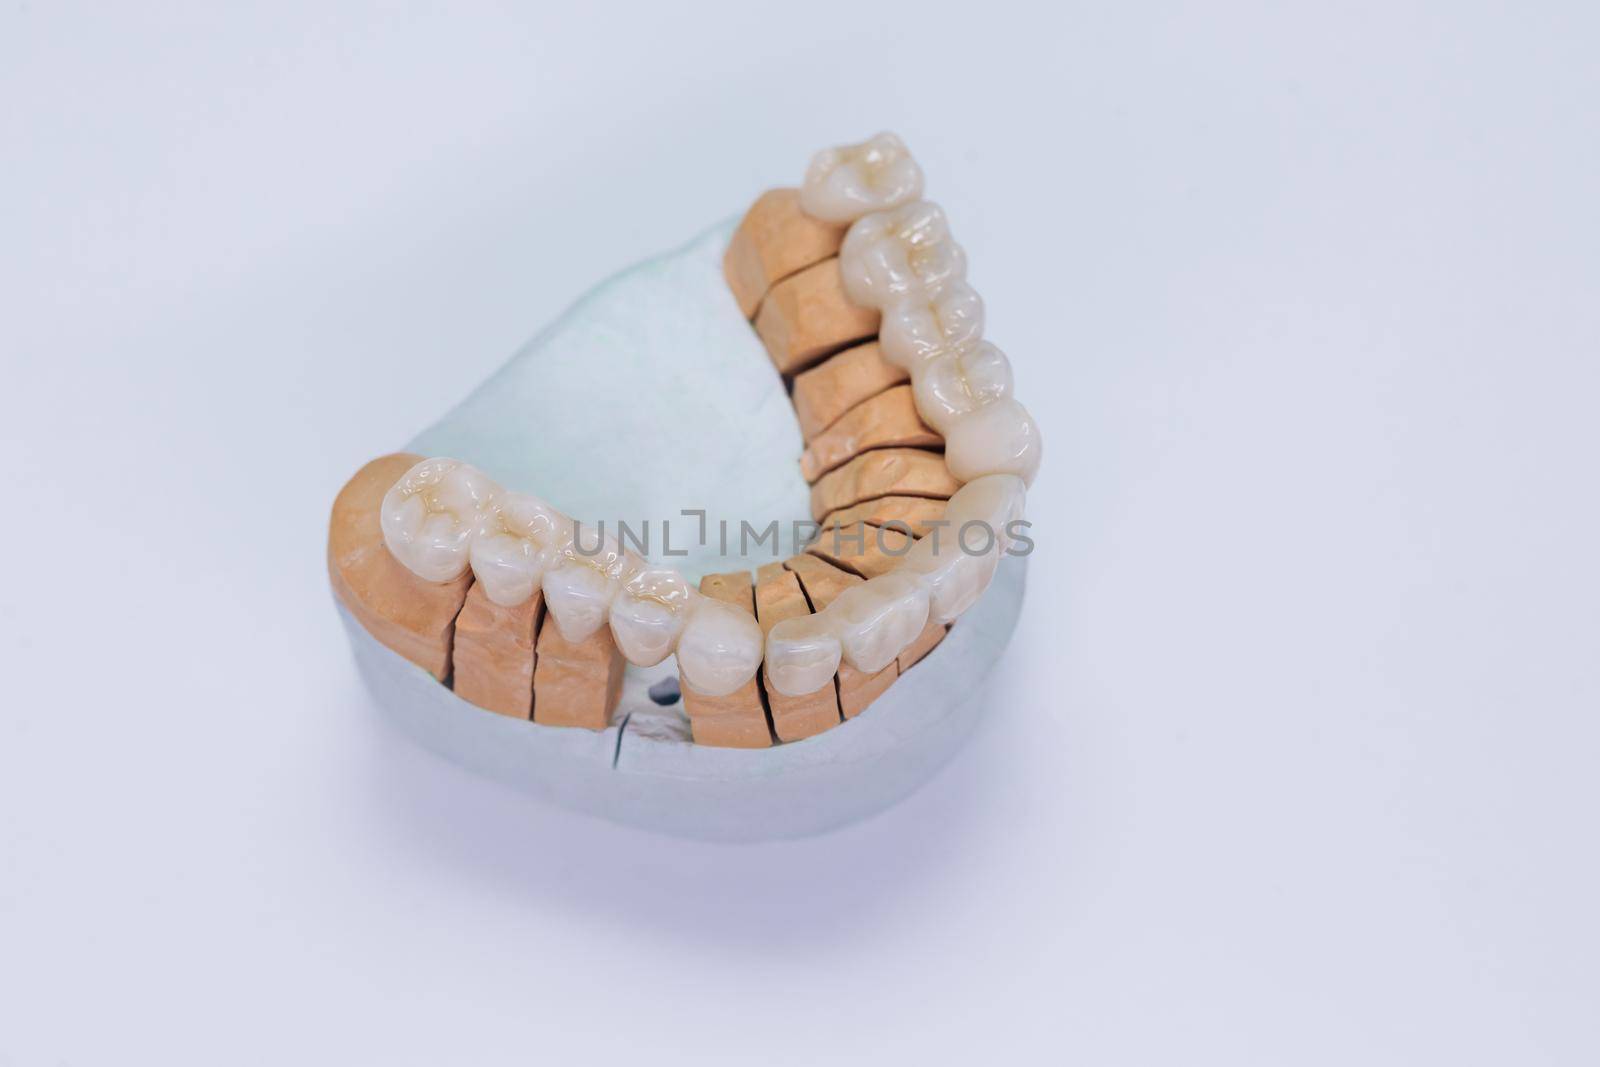 Metal free ceramic dental crowns. Close-up ceramic crowns veneers on a gypsum model. Illuminated glossy look and natural translucency, effect for hollywood smile makeover by uflypro